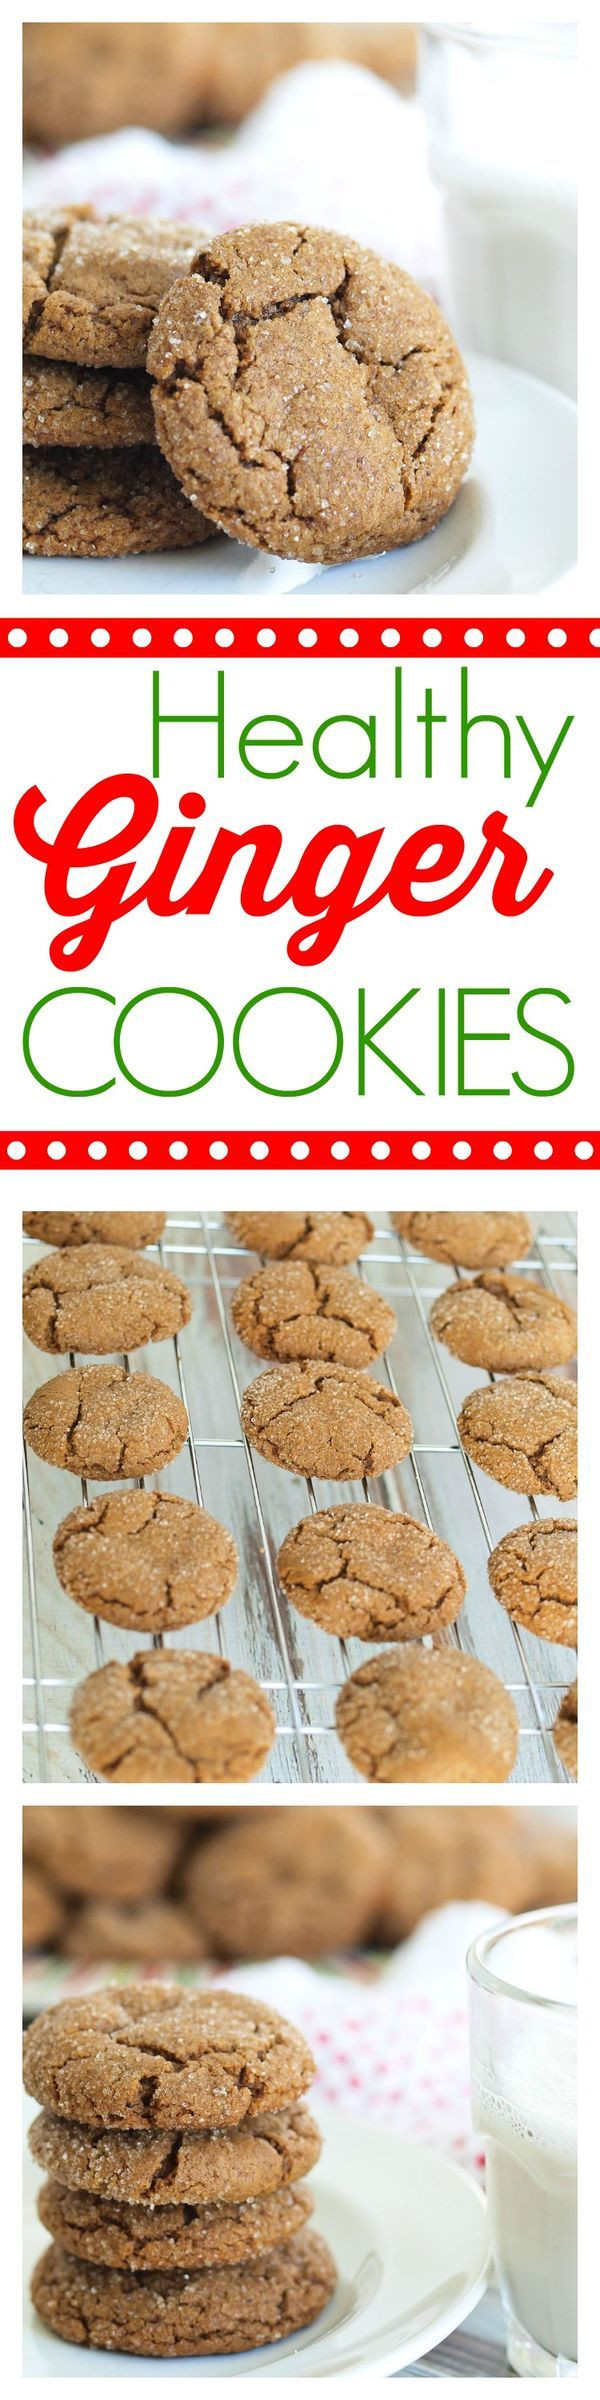 Healthy Christmas Cookies
 Healthier Ginger Cookies Recipe If you are looking for